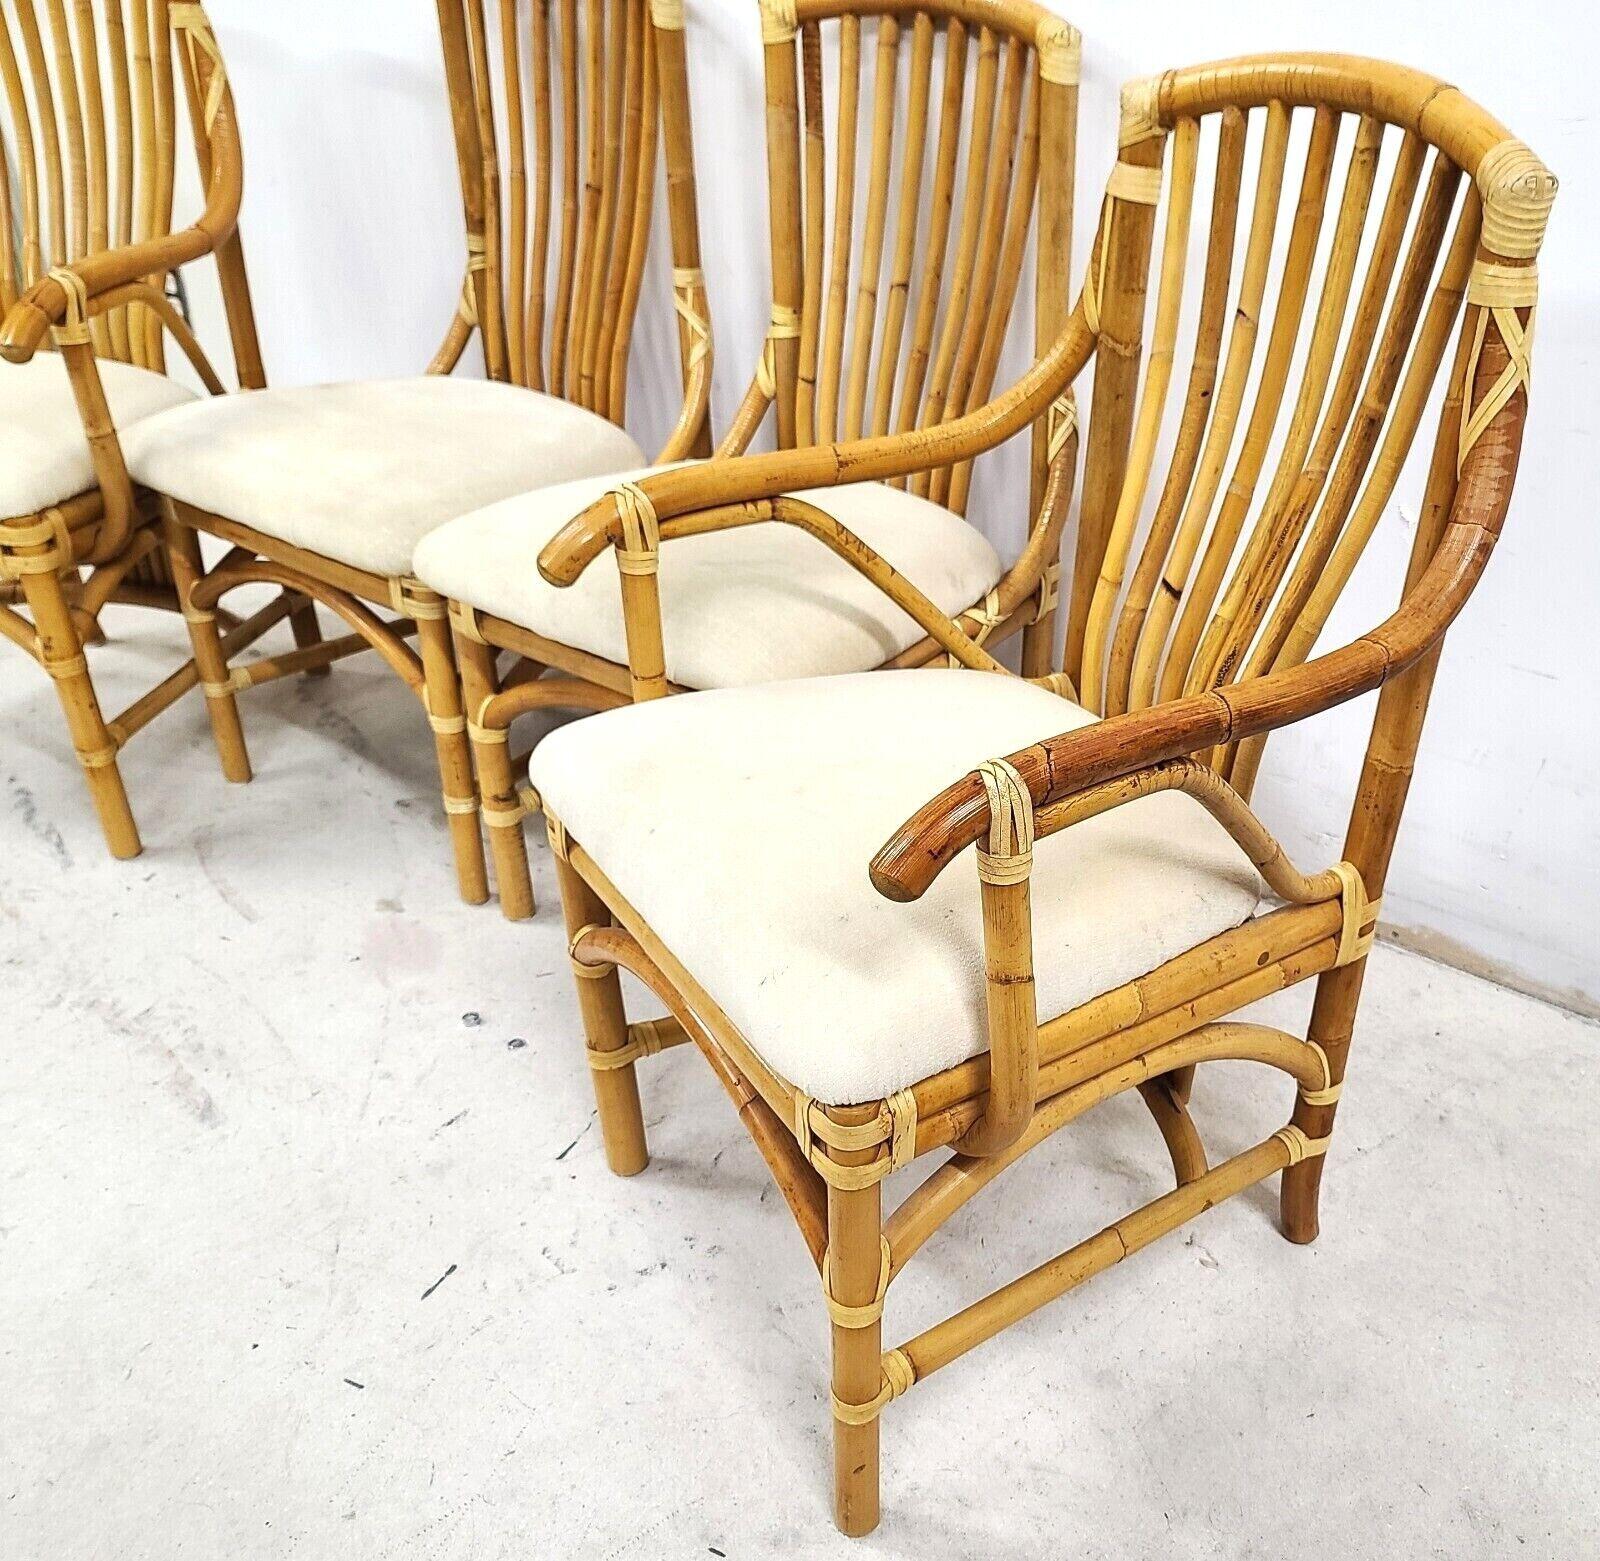 Late 20th Century Vintage 1970s Bamboo Rattan Chairs, Set of 4 For Sale